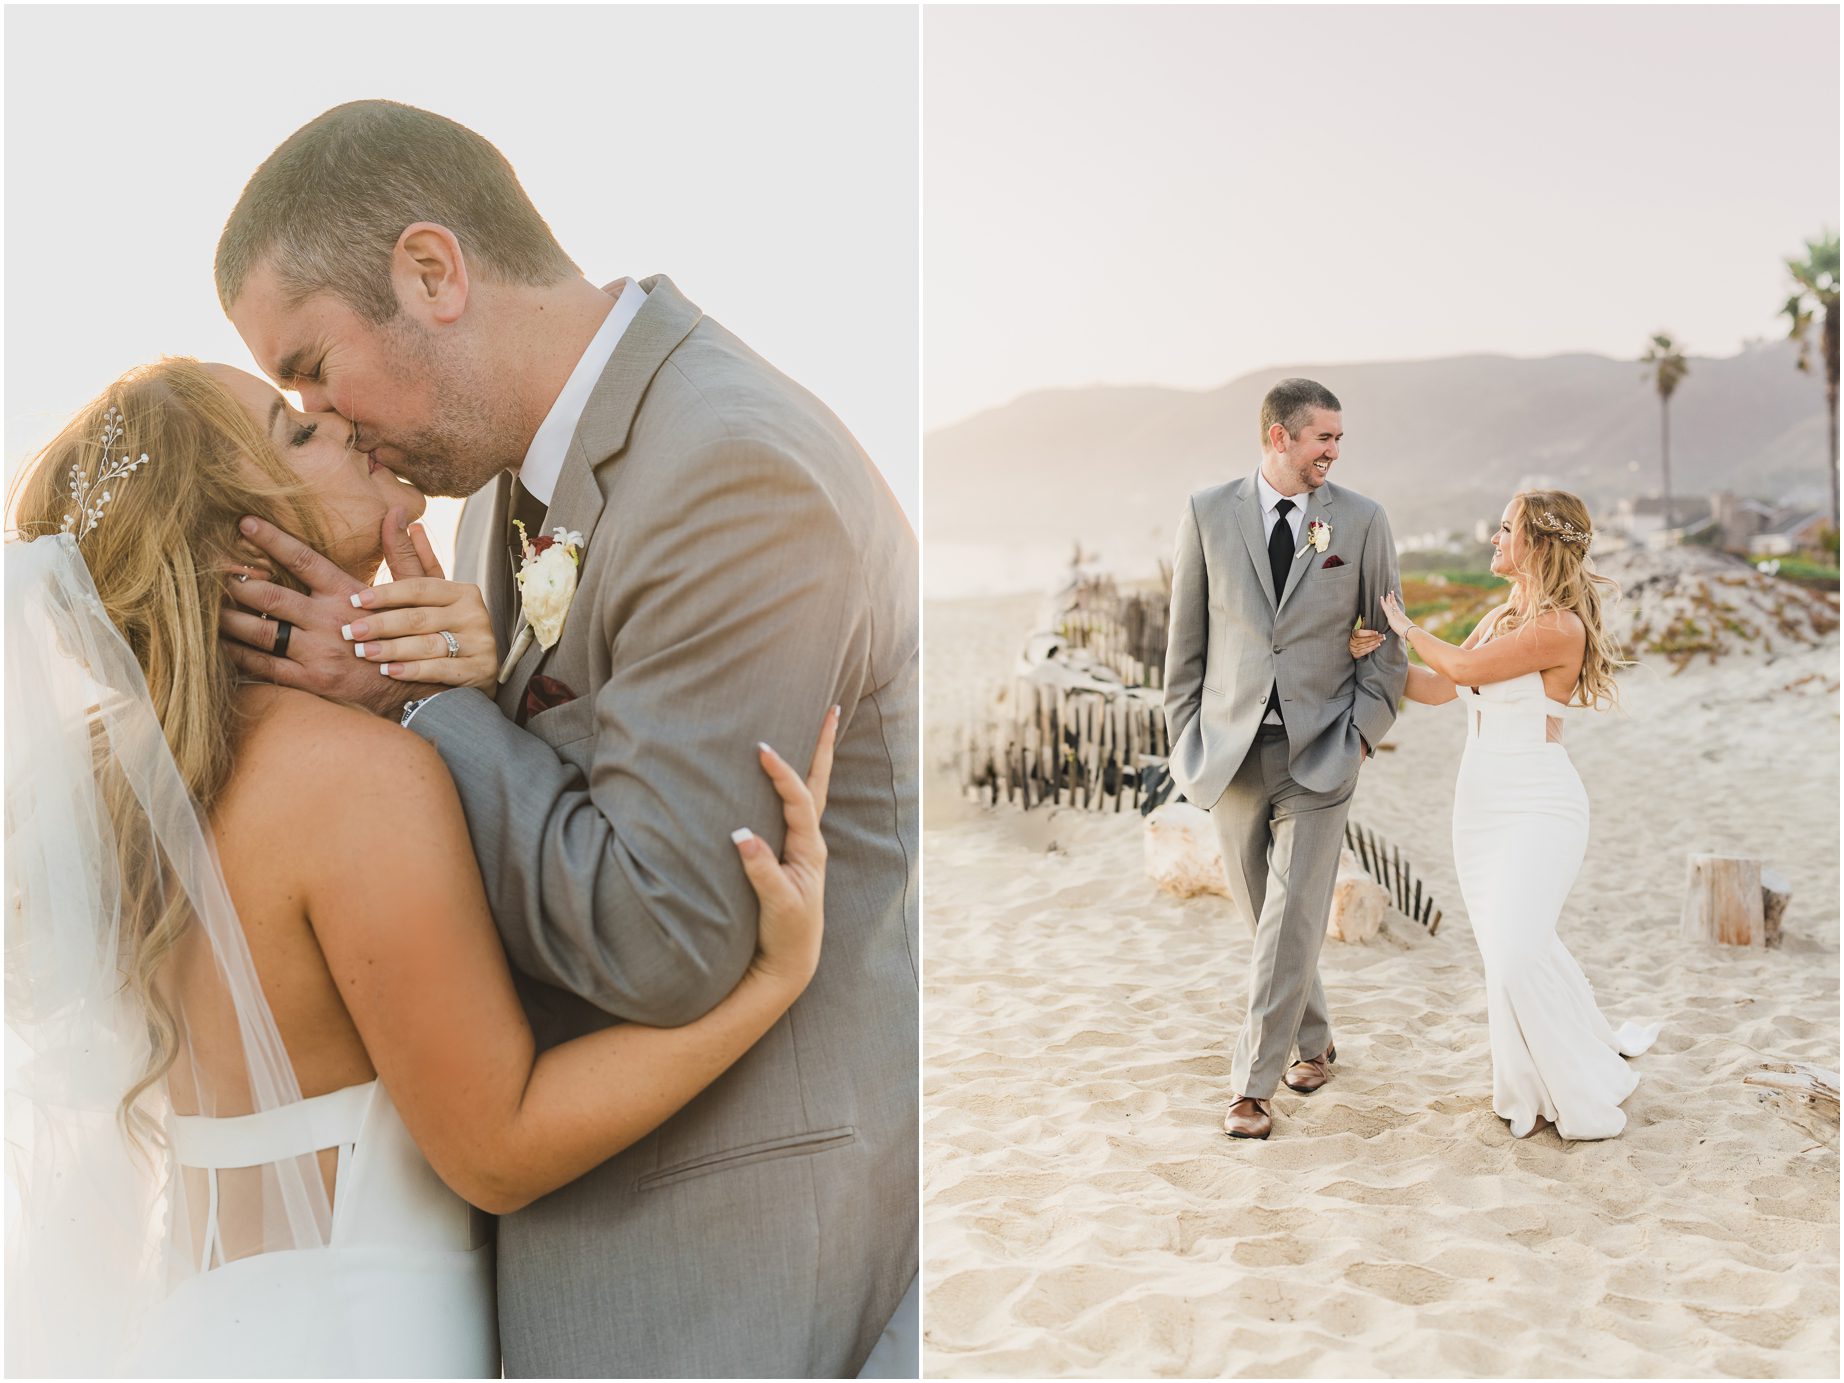 Couples portraits of a bride and groom on the beach in front of Malibu west beach club